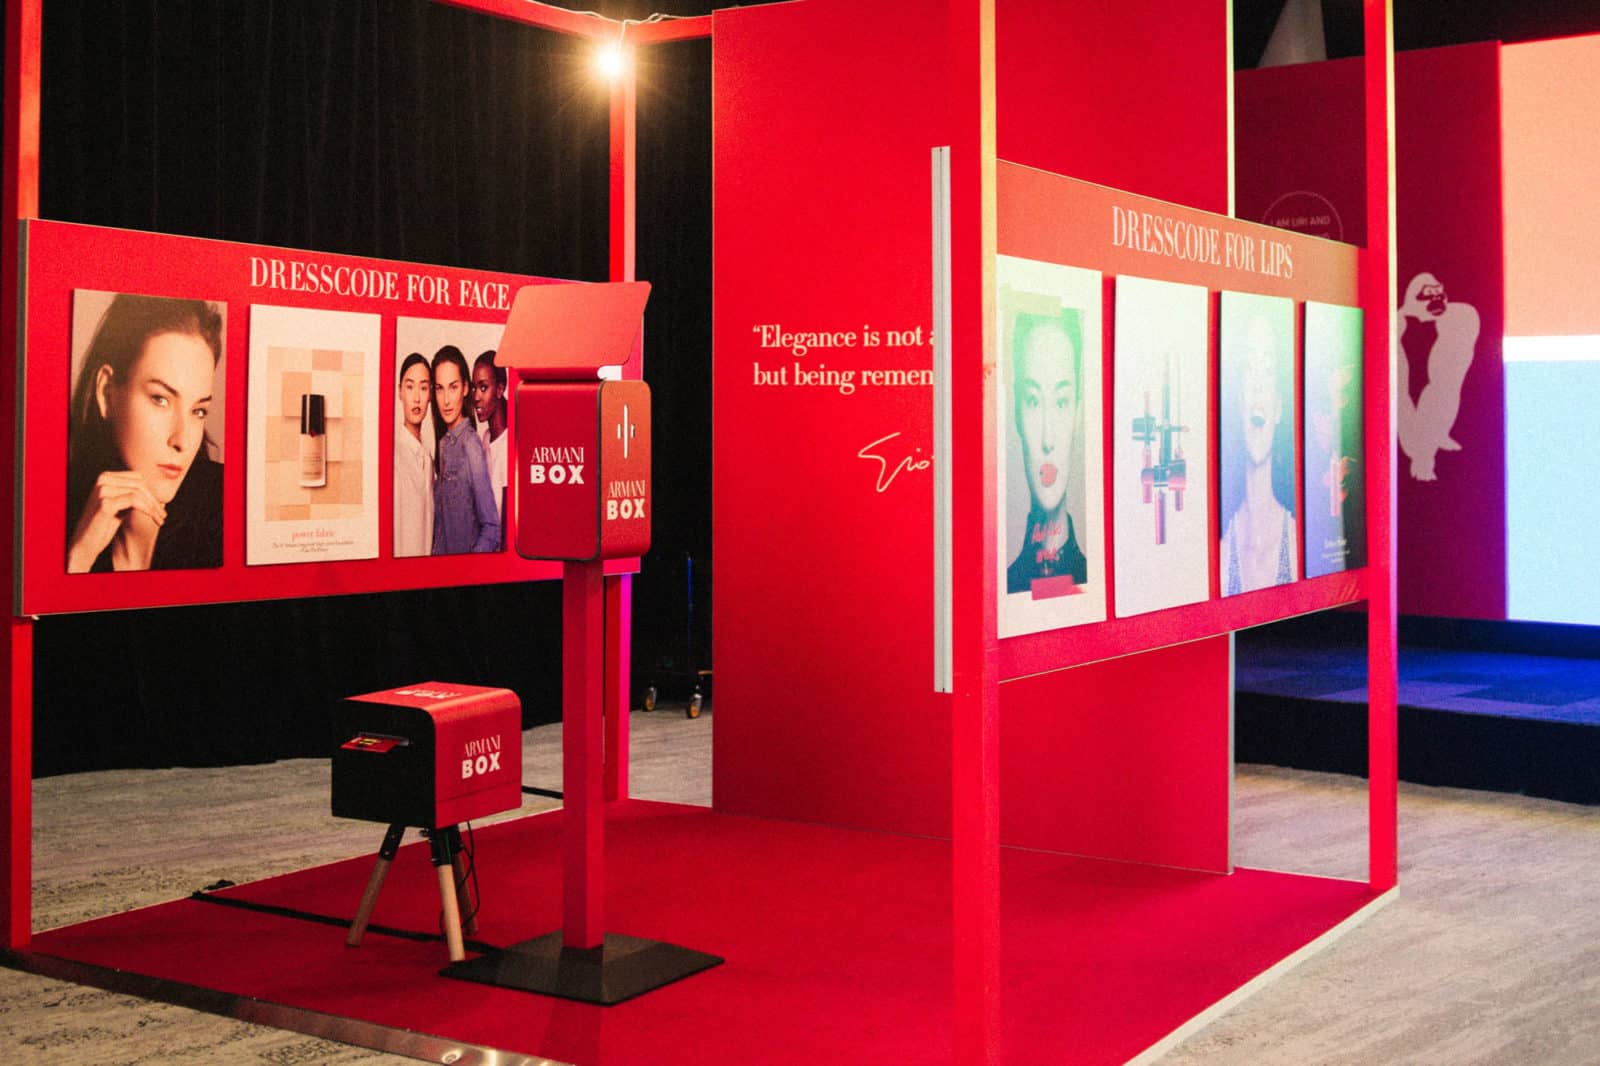 Branded Photo Booth and printer stand in red retail space